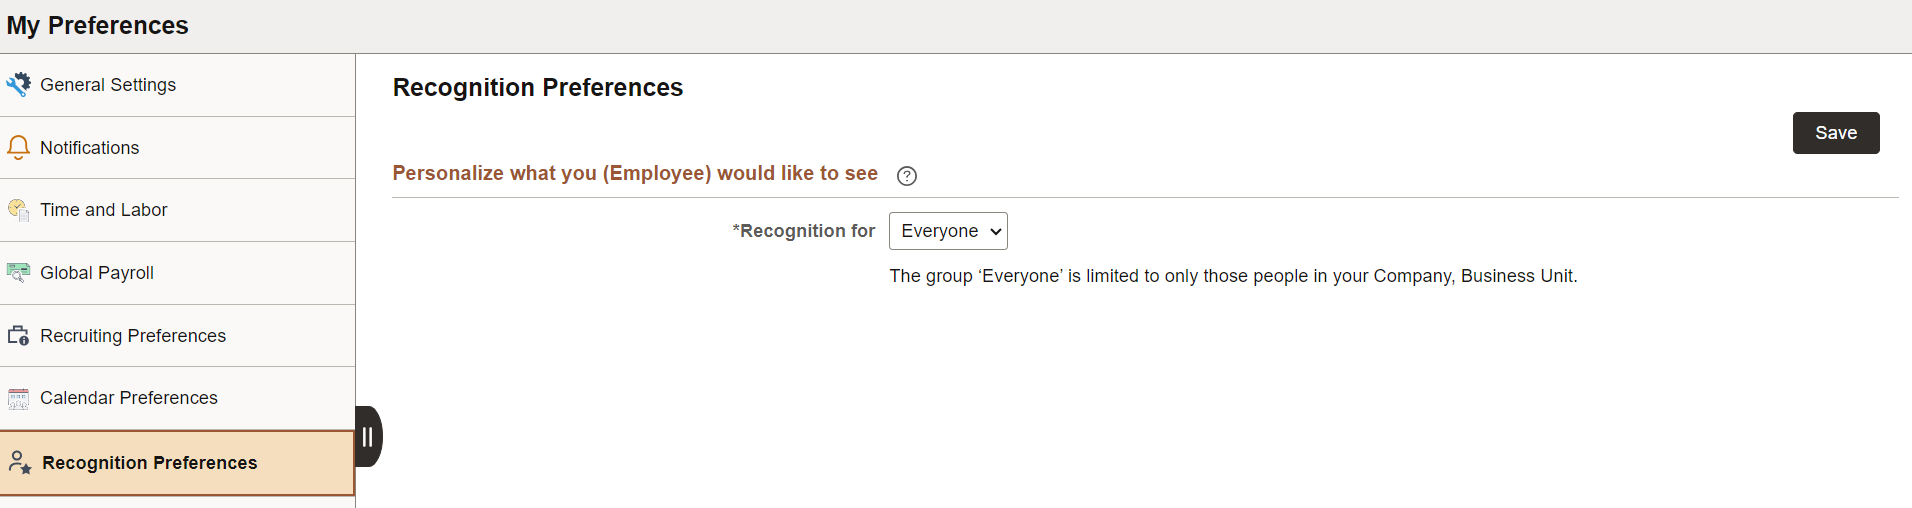 Recognition Preferences page